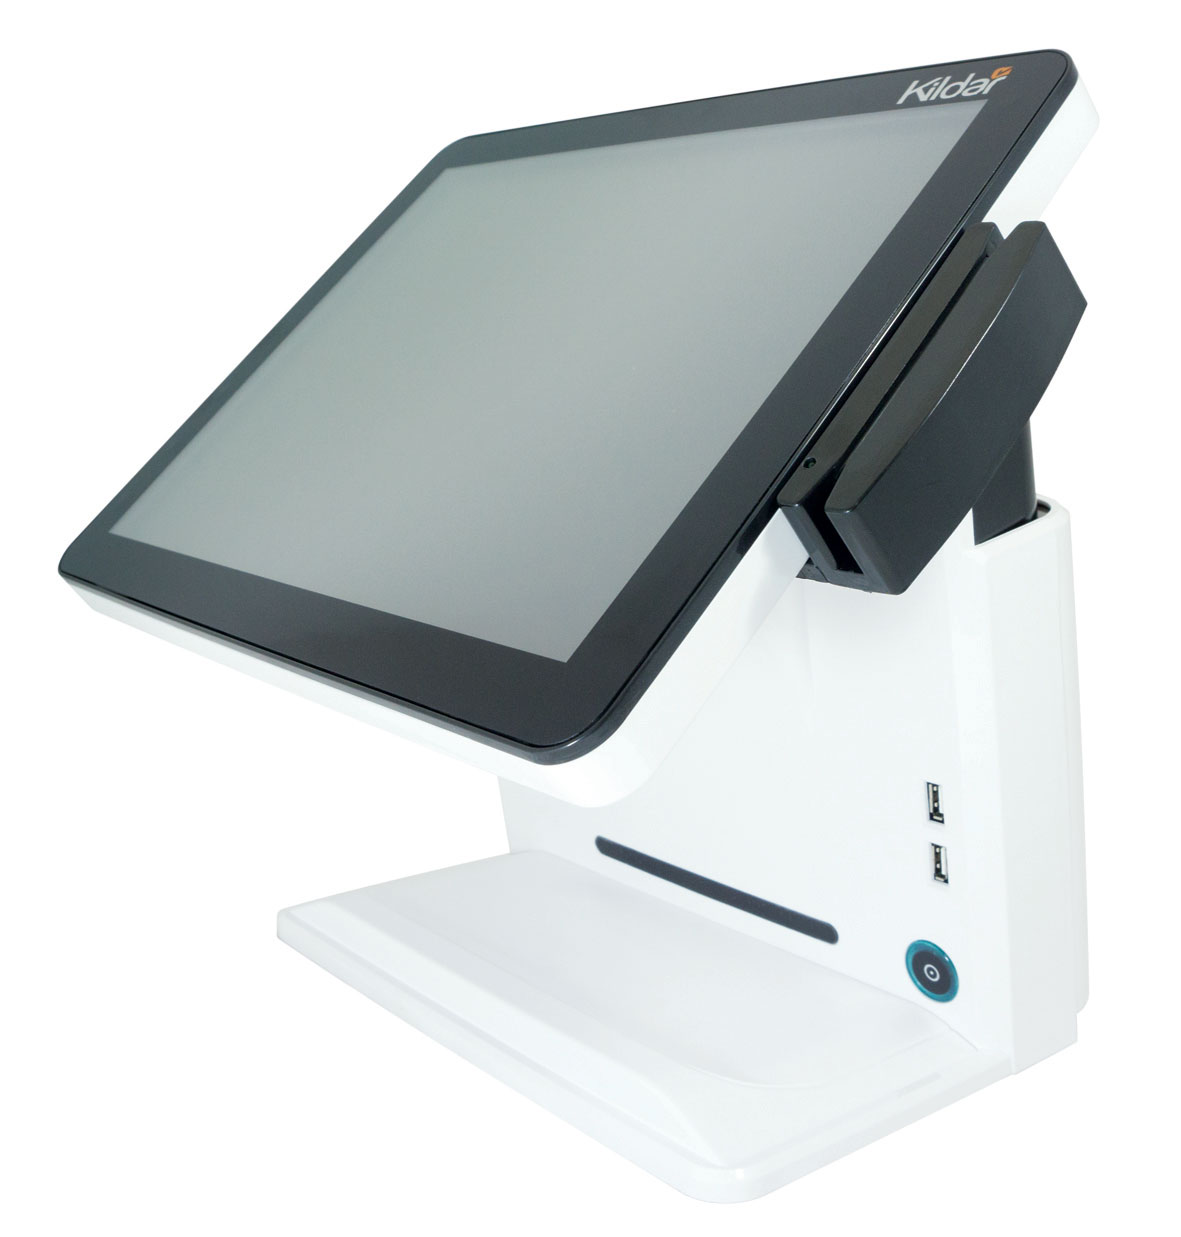 Kildar POS Touch screen Terminals DataTouch T1575